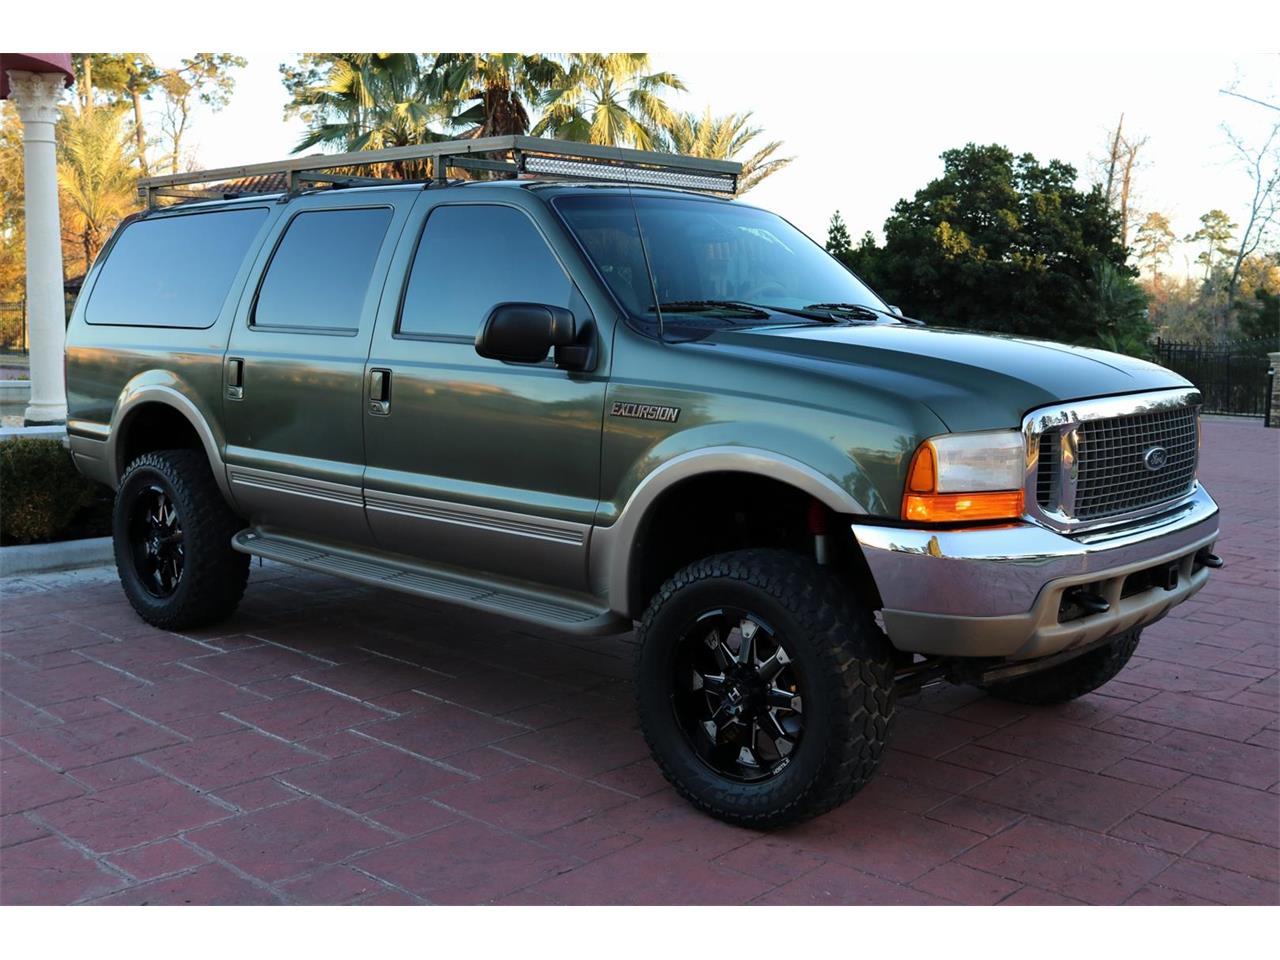 ford excursion for sale corpus christi